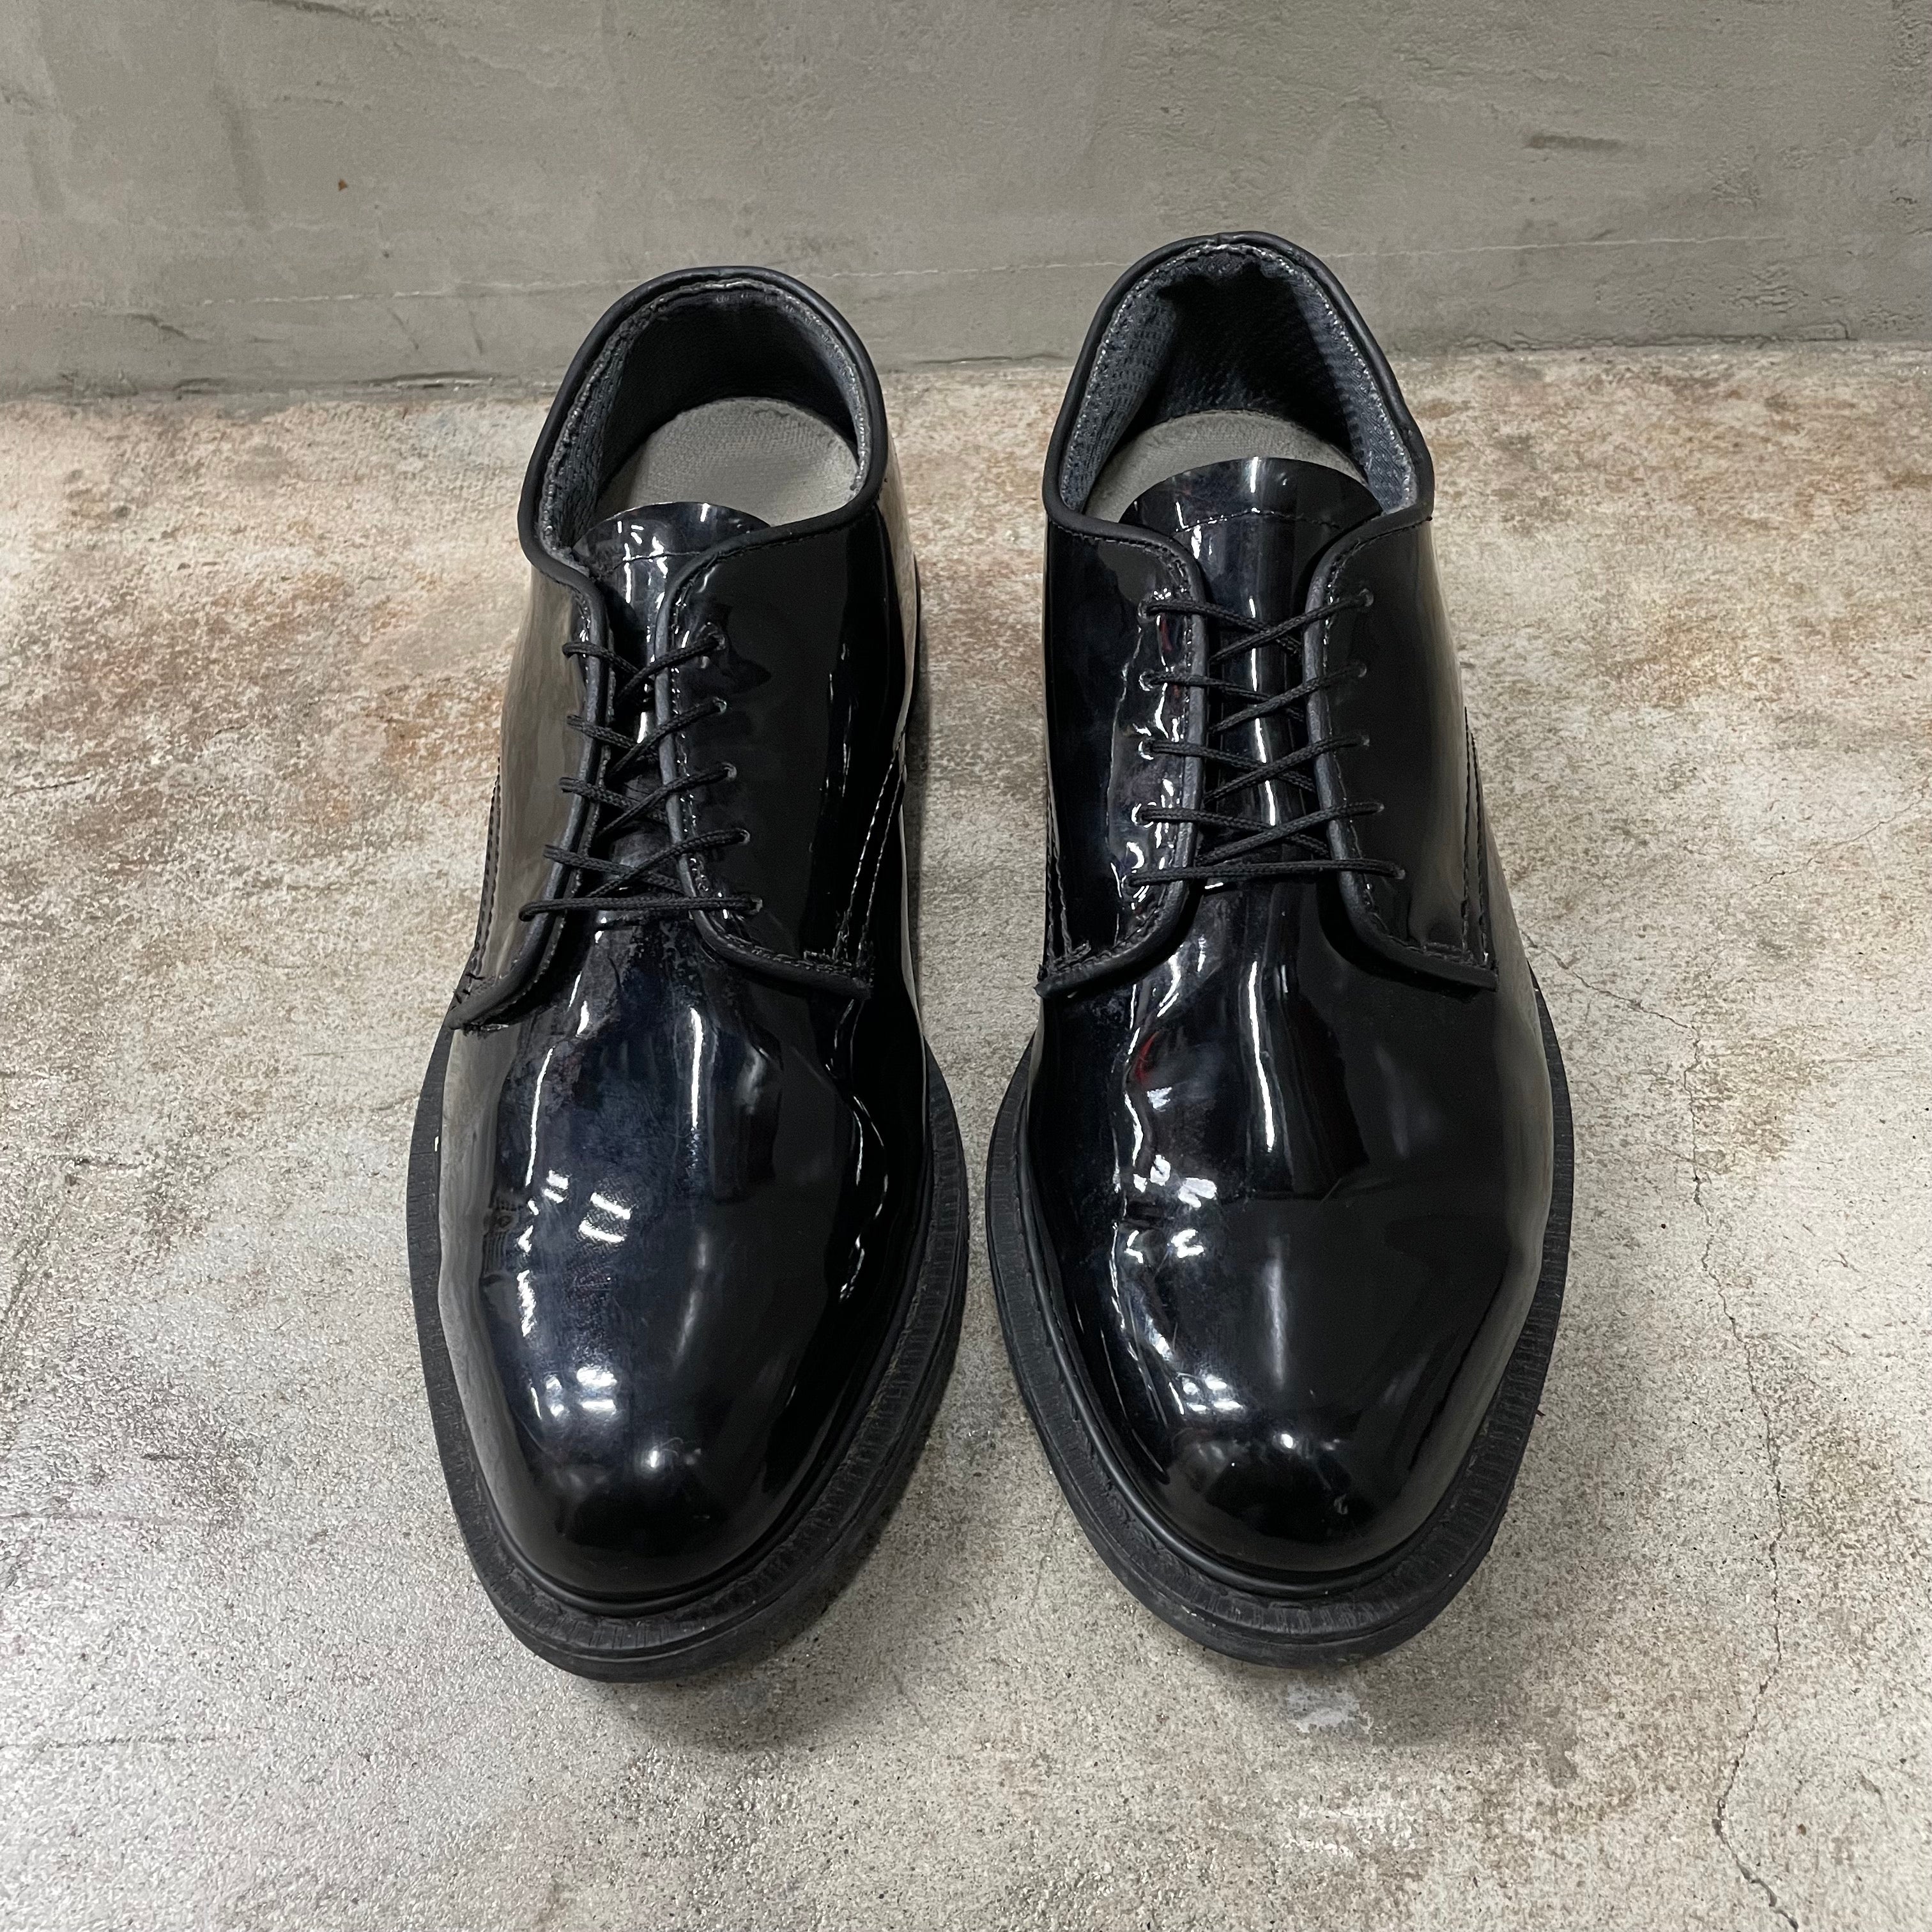 [ ONLY ONE ! ] AVONITE HYPALON PATENT DRESS SHOES / U.S.MILITARY